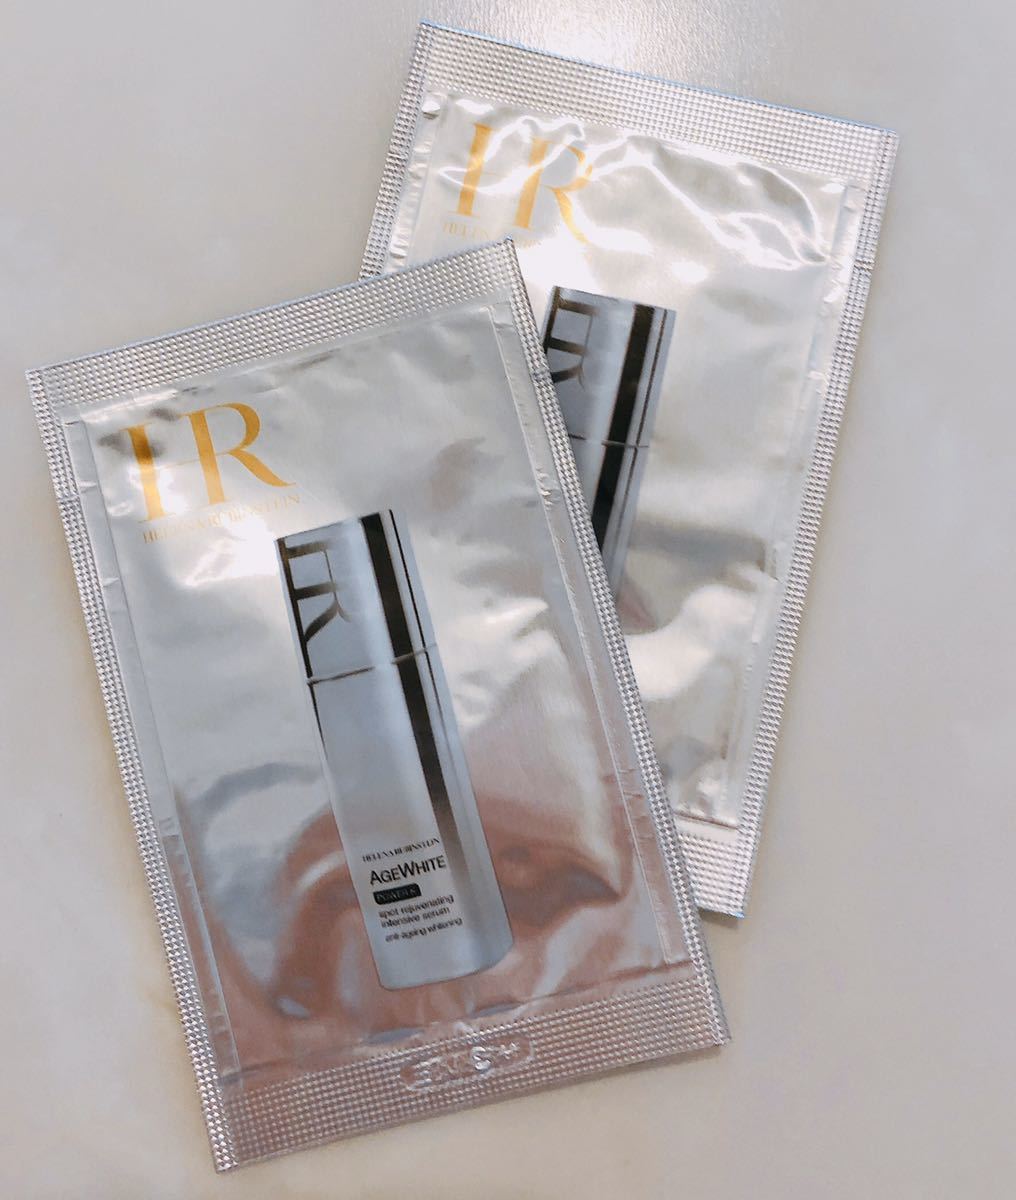  new goods * Helena Rubinstein AG white power K outlet Ray to* sample 2 piece set 